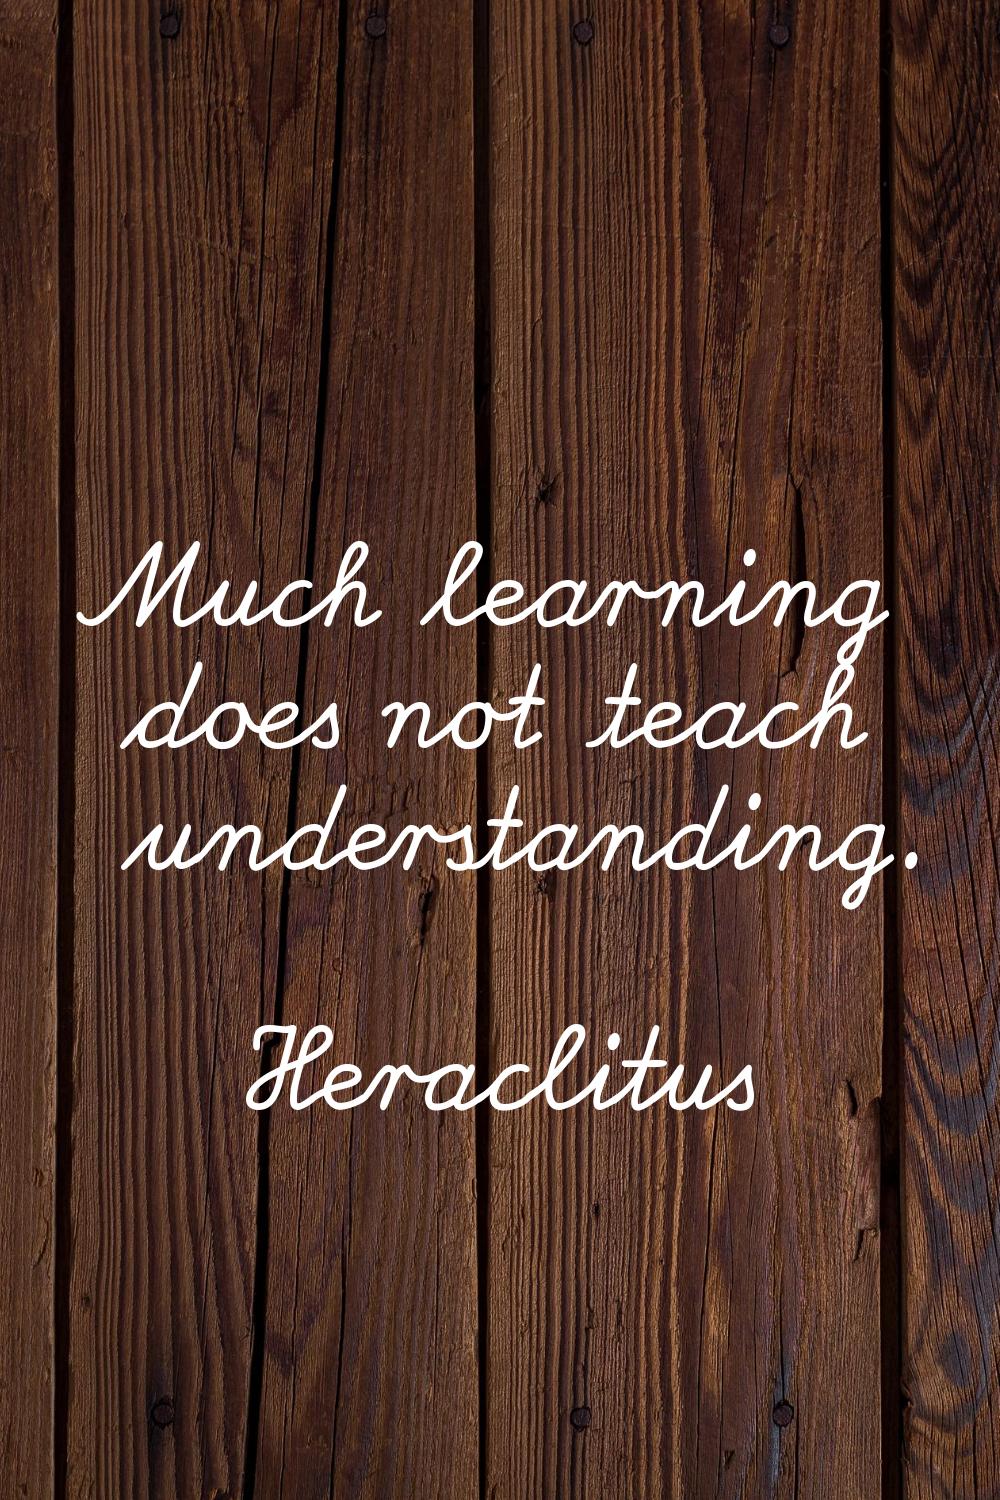 Much learning does not teach understanding.